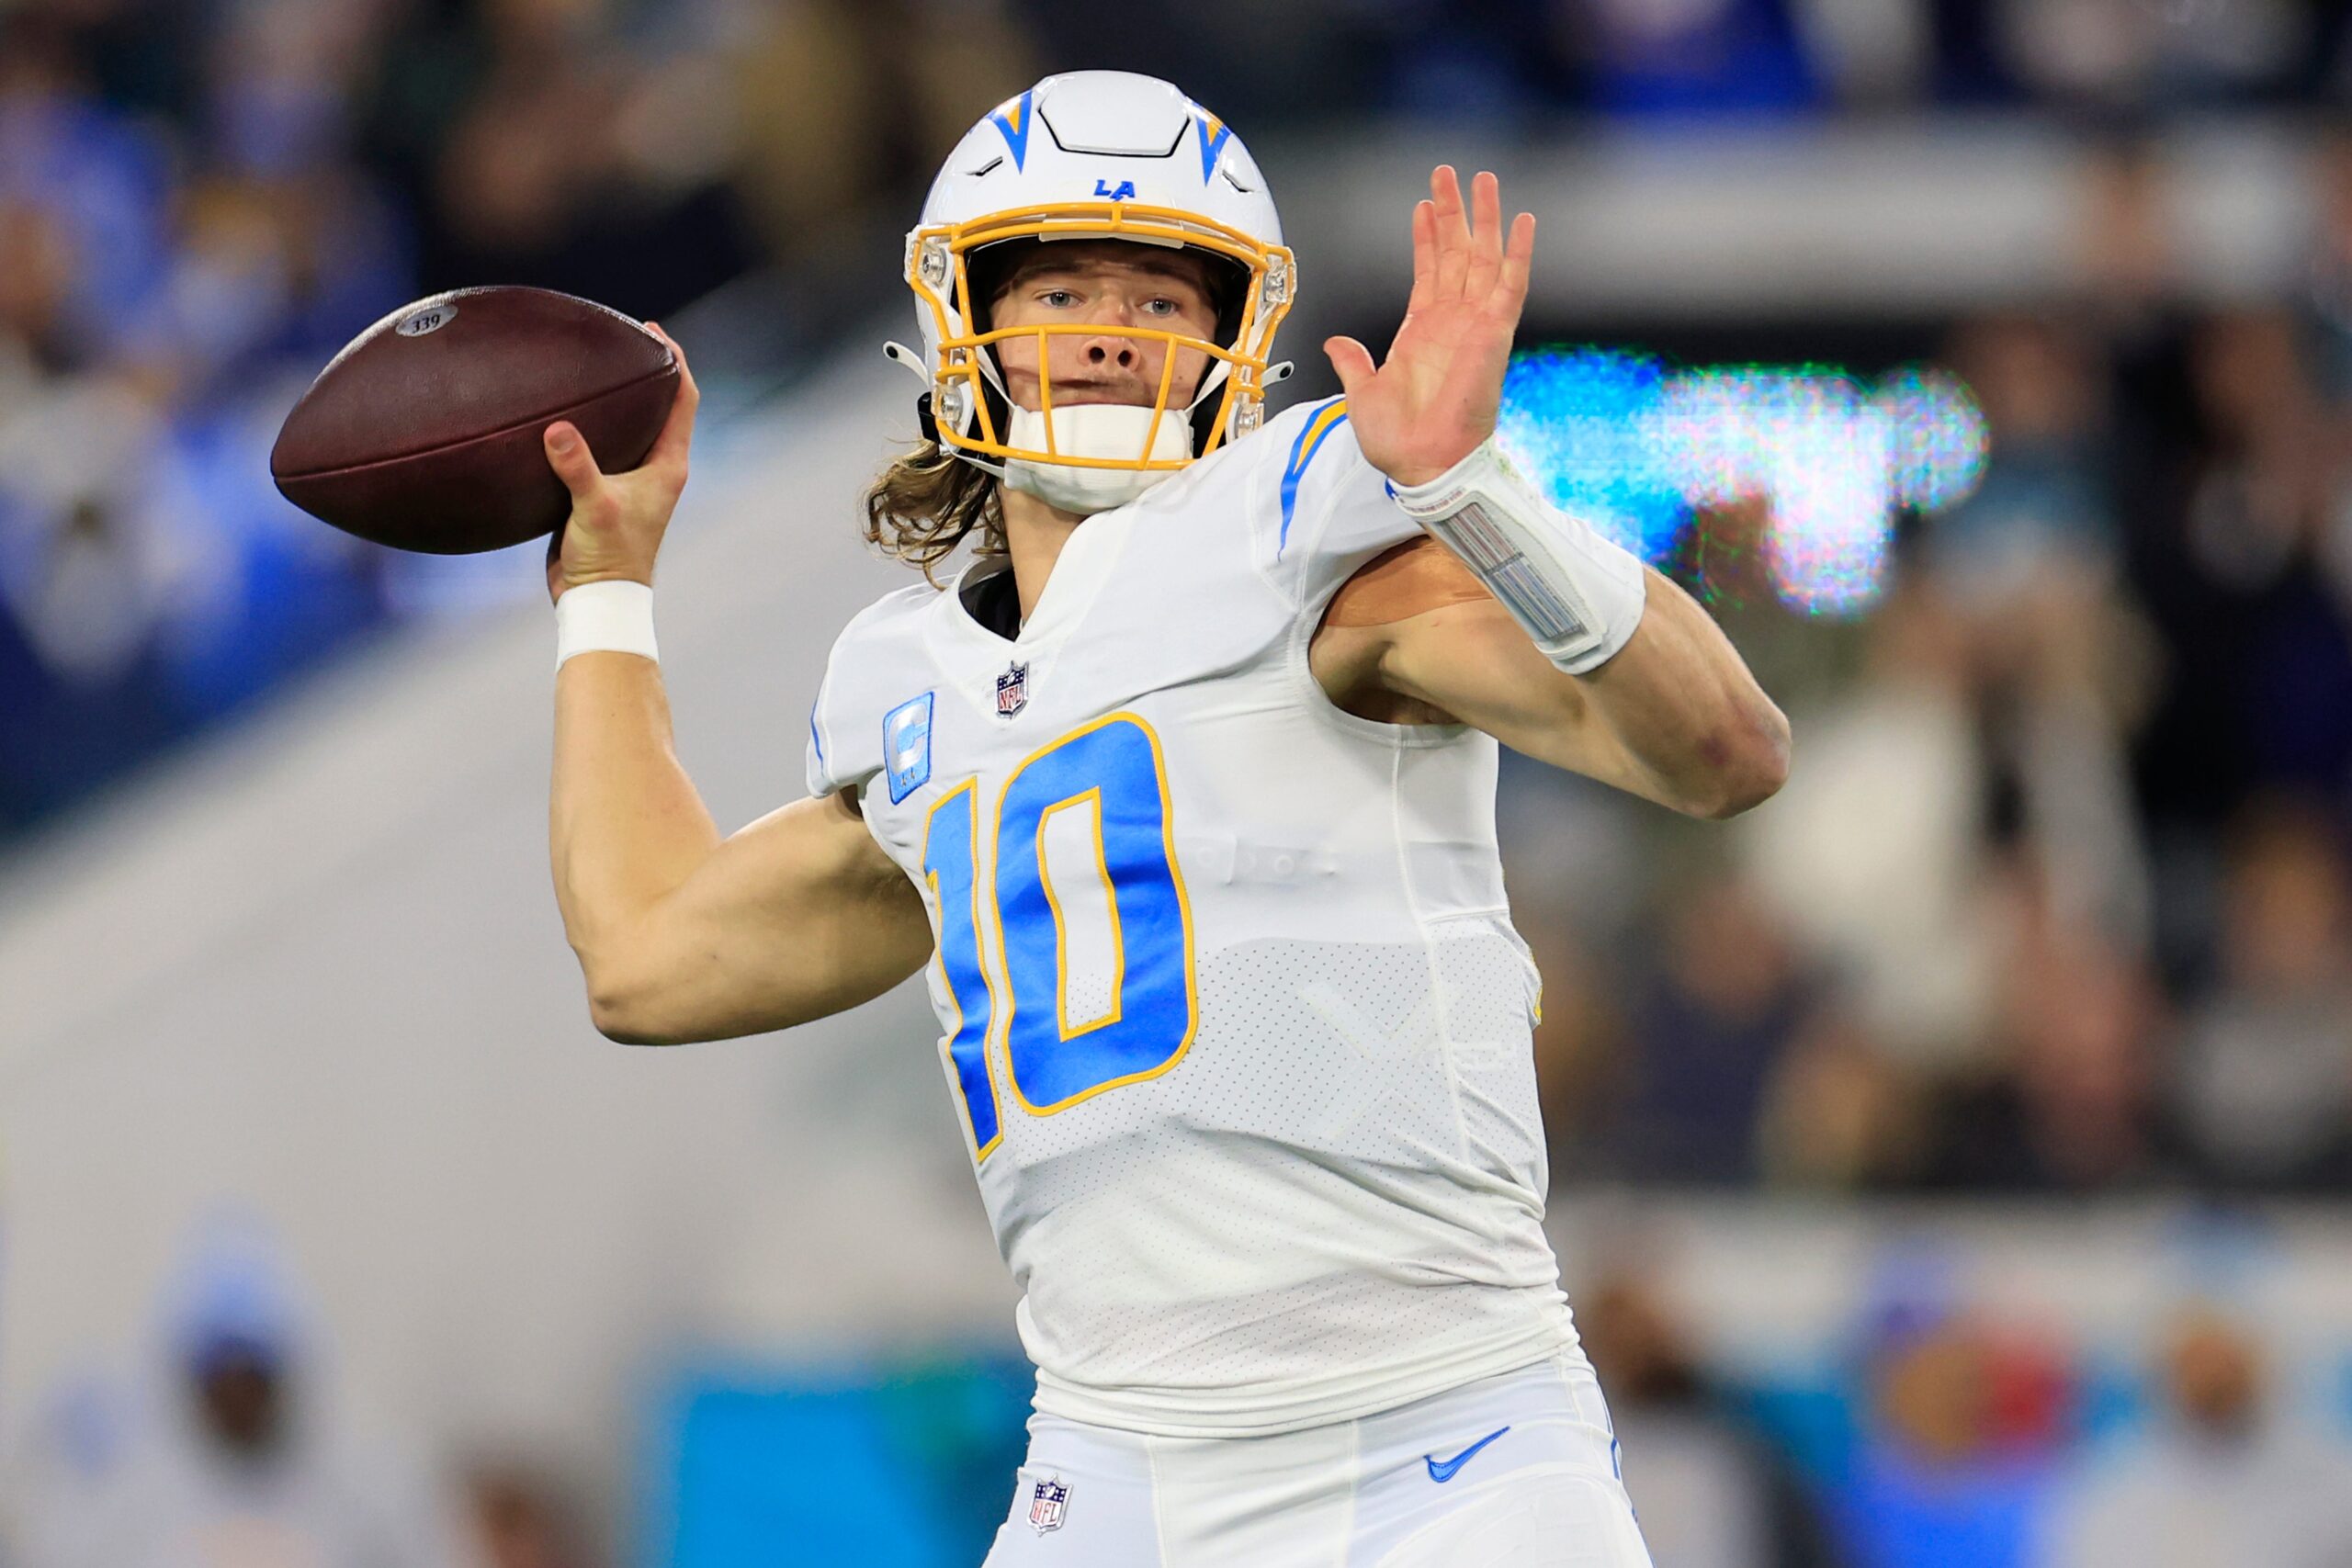 2020 Fantasy Football Projections: Top 50 Wide Receivers - LAFB Network